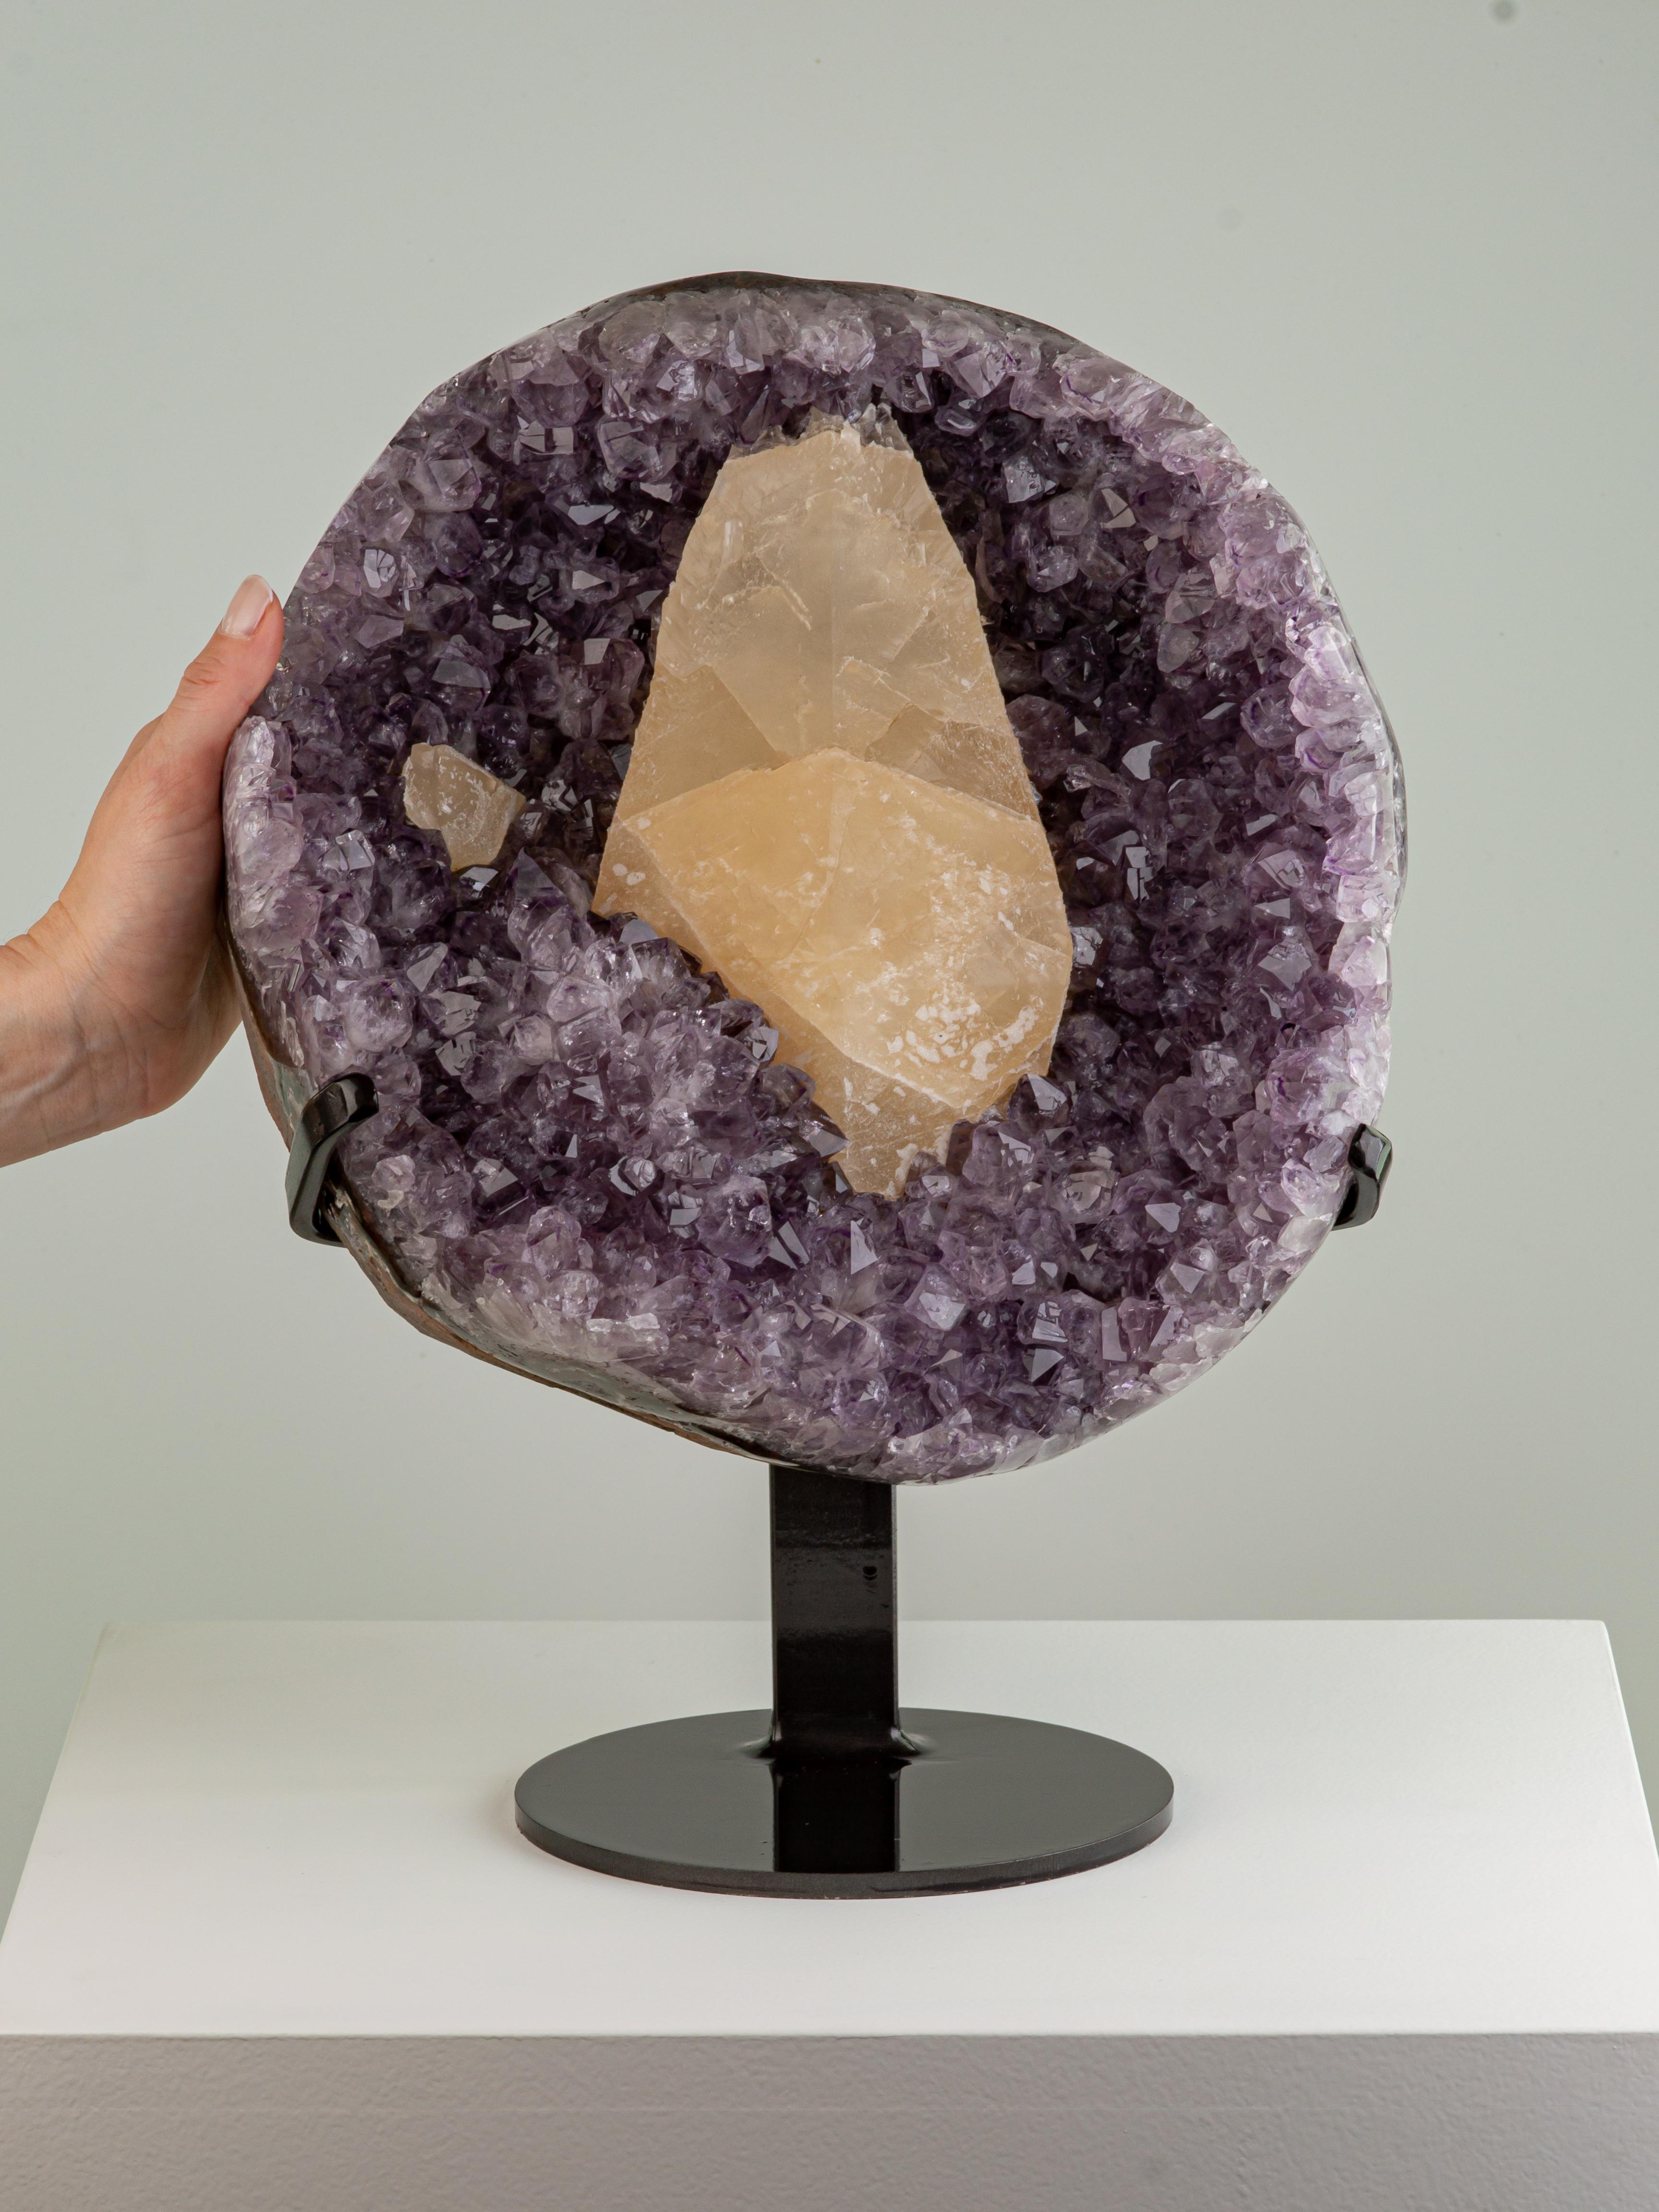 A pleasing lilac amethyst formation of large crystals with a large honey
coloured calcite at the centre and a smaller calcite to the side.

Amethyst is predominantly light violet to deep purple, but can be found with secondary hues of red and